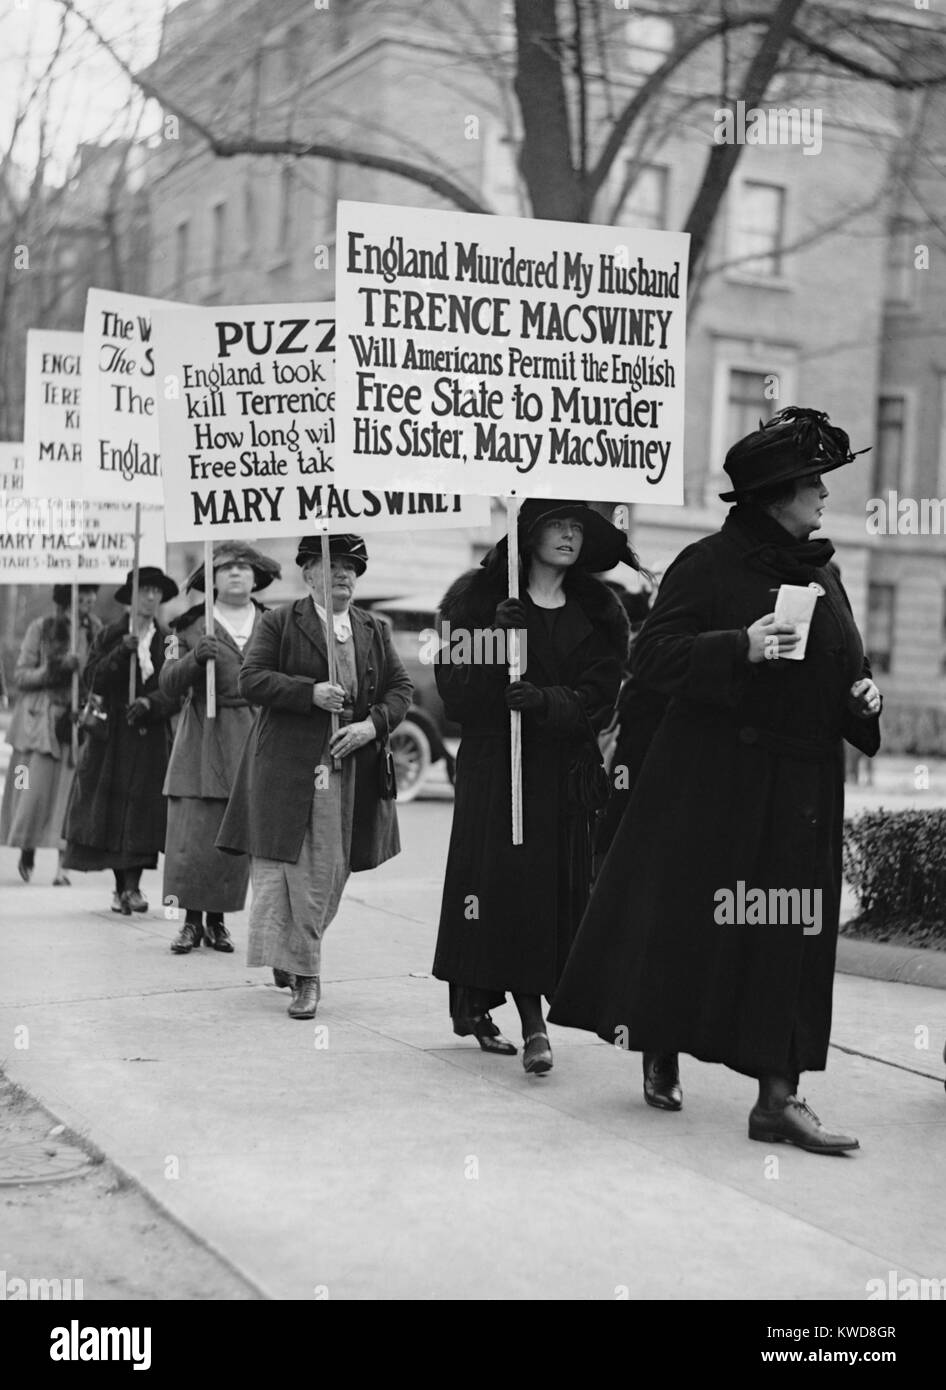 Muriel Murphy MacSwiney (2nd from right) protesting against oppression of Sinn Fein activists. 1922. The widow of nationalist hero, Terence MacSwiney, protests for her sister-in-law, Mary MacSwiney, whose life was threatened by her hunger strike in an Irish Free State Prison. (BSLOC 2015 16 121) Stock Photo